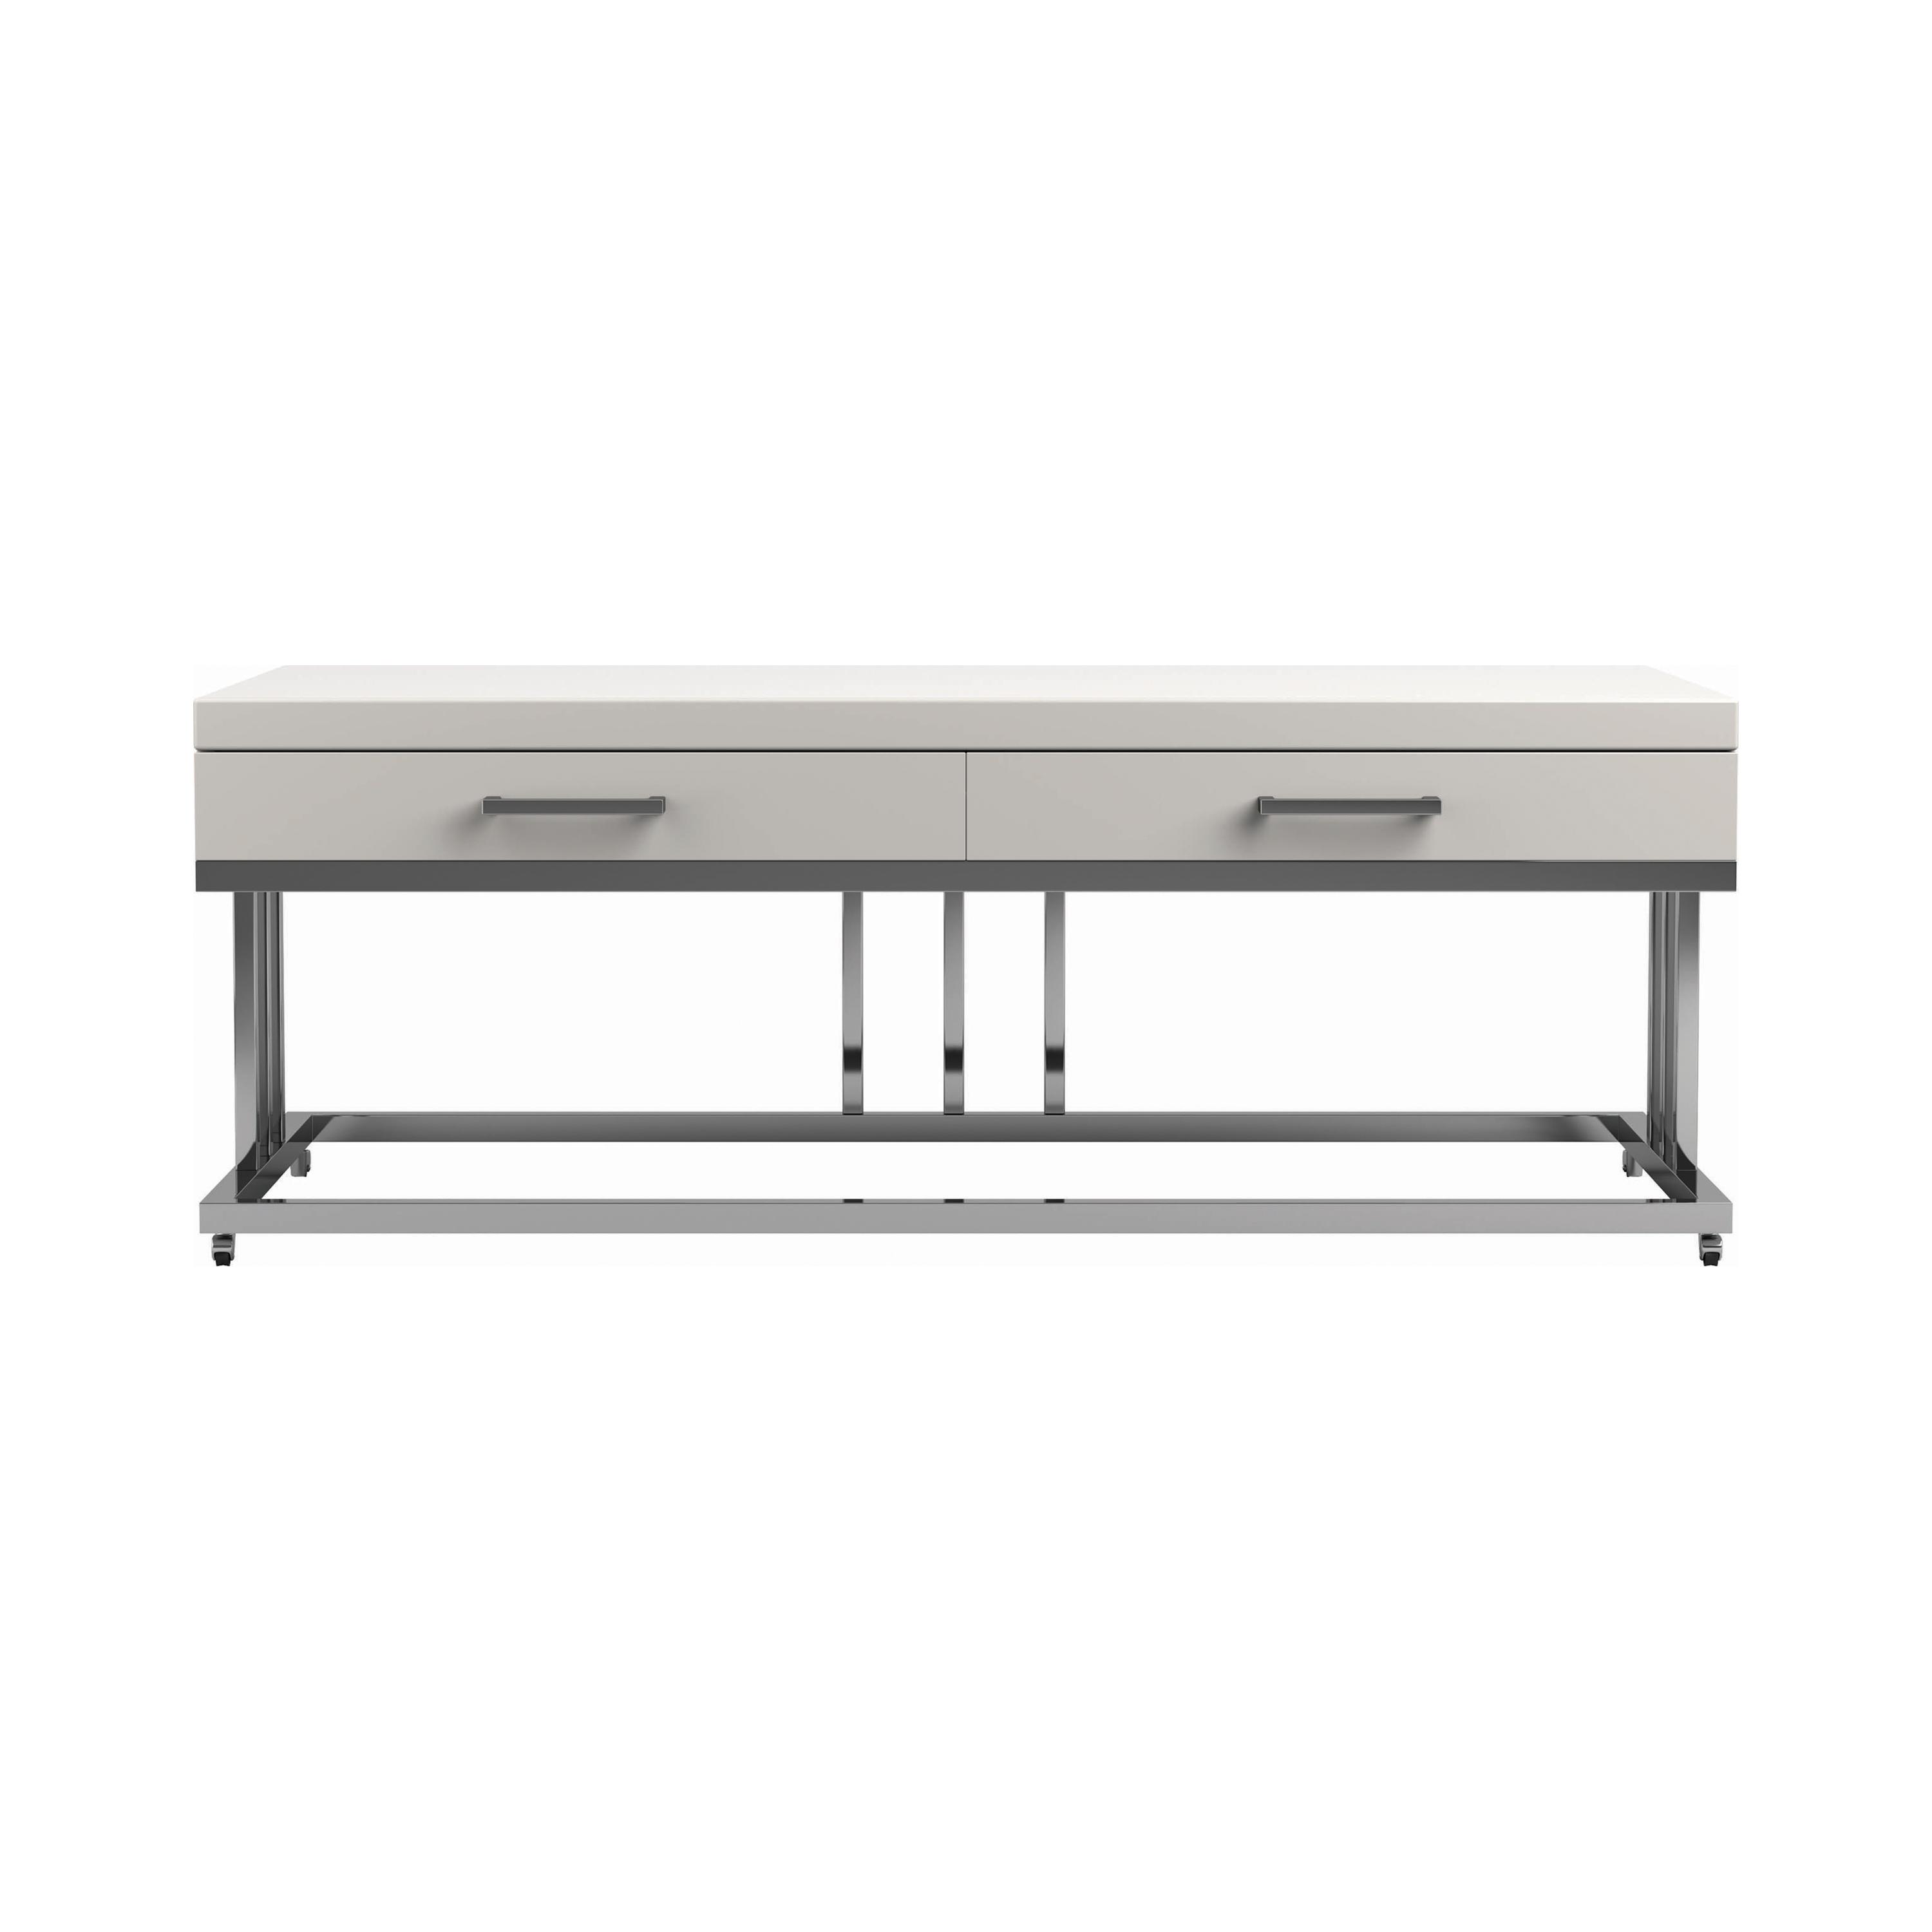 Modern Coffee Table 723138 723138 in White 